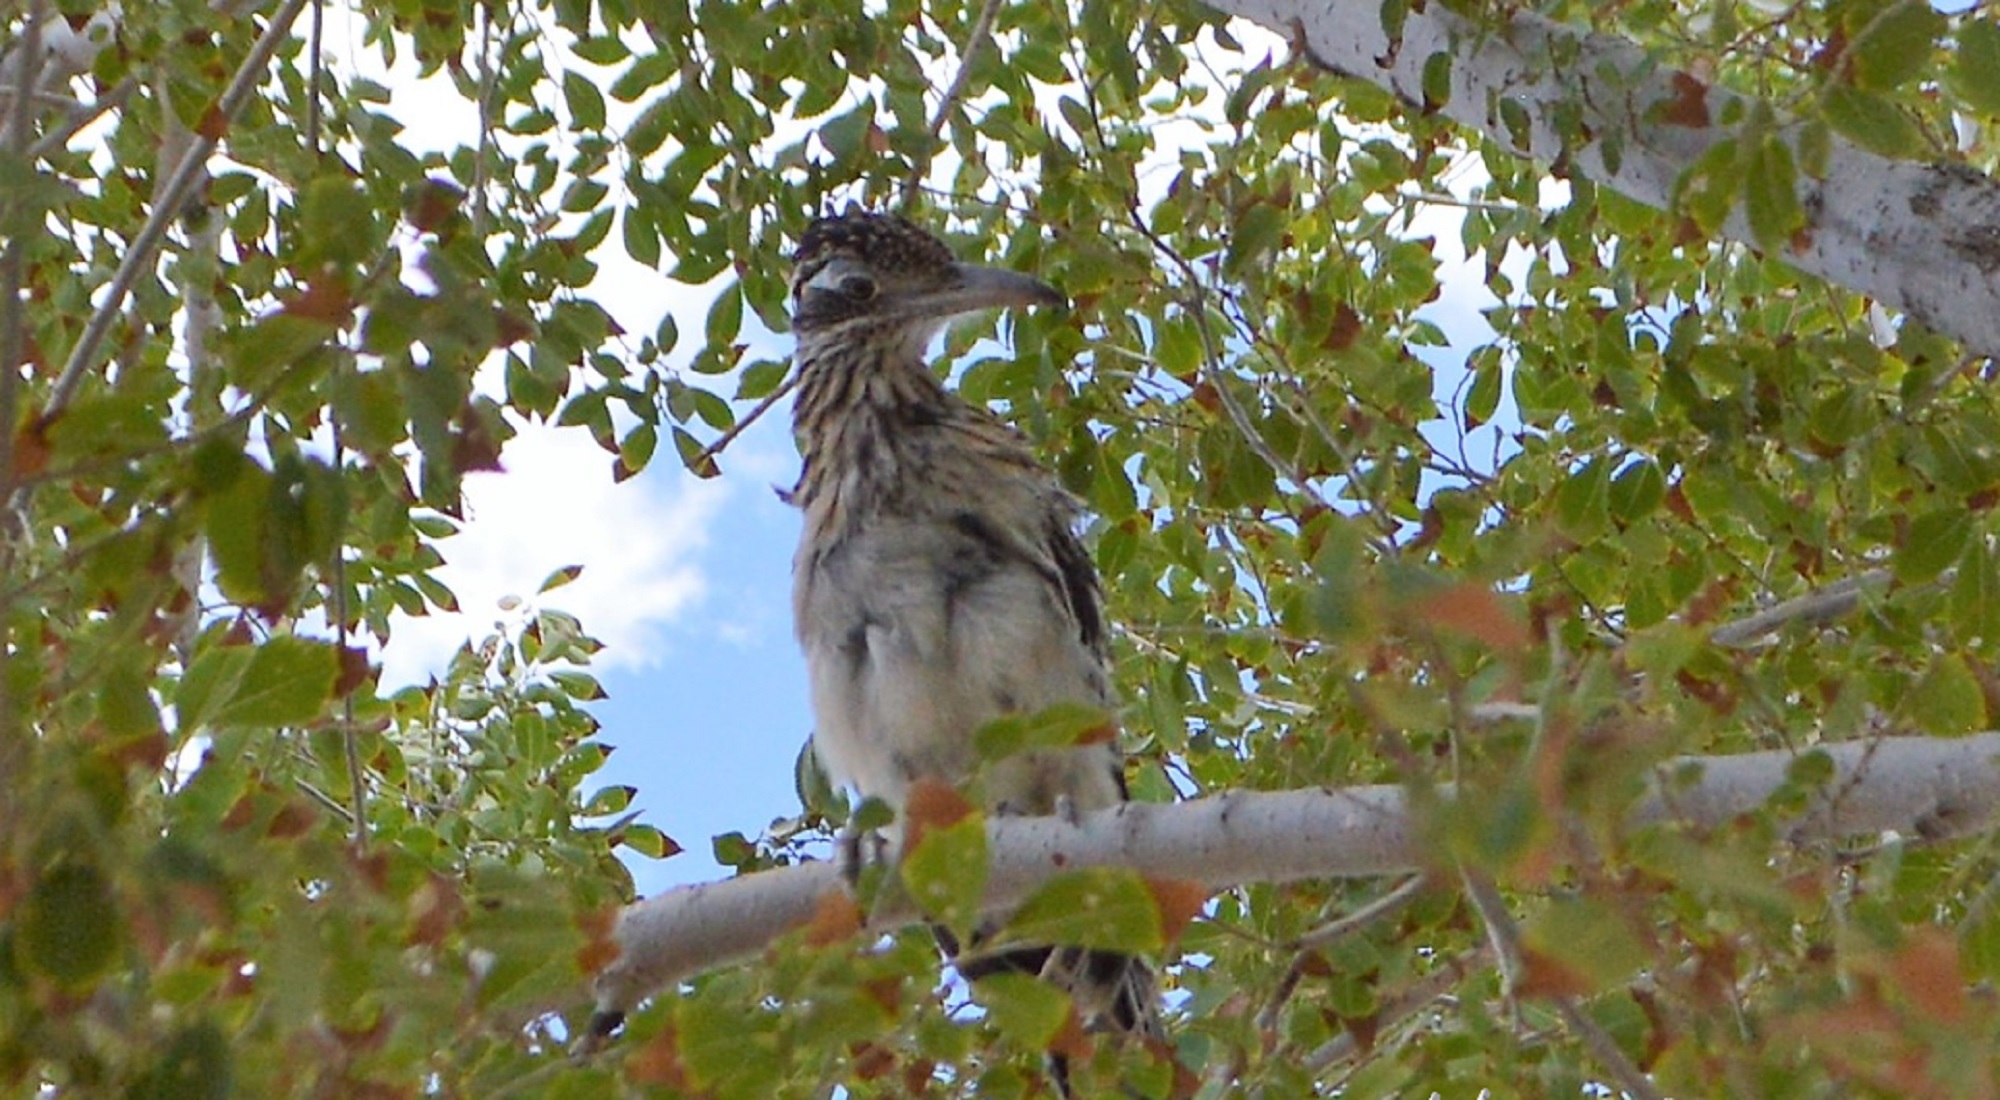 A roadrunner in my elm tree 2018. I used a D3200 Nikon for this image.